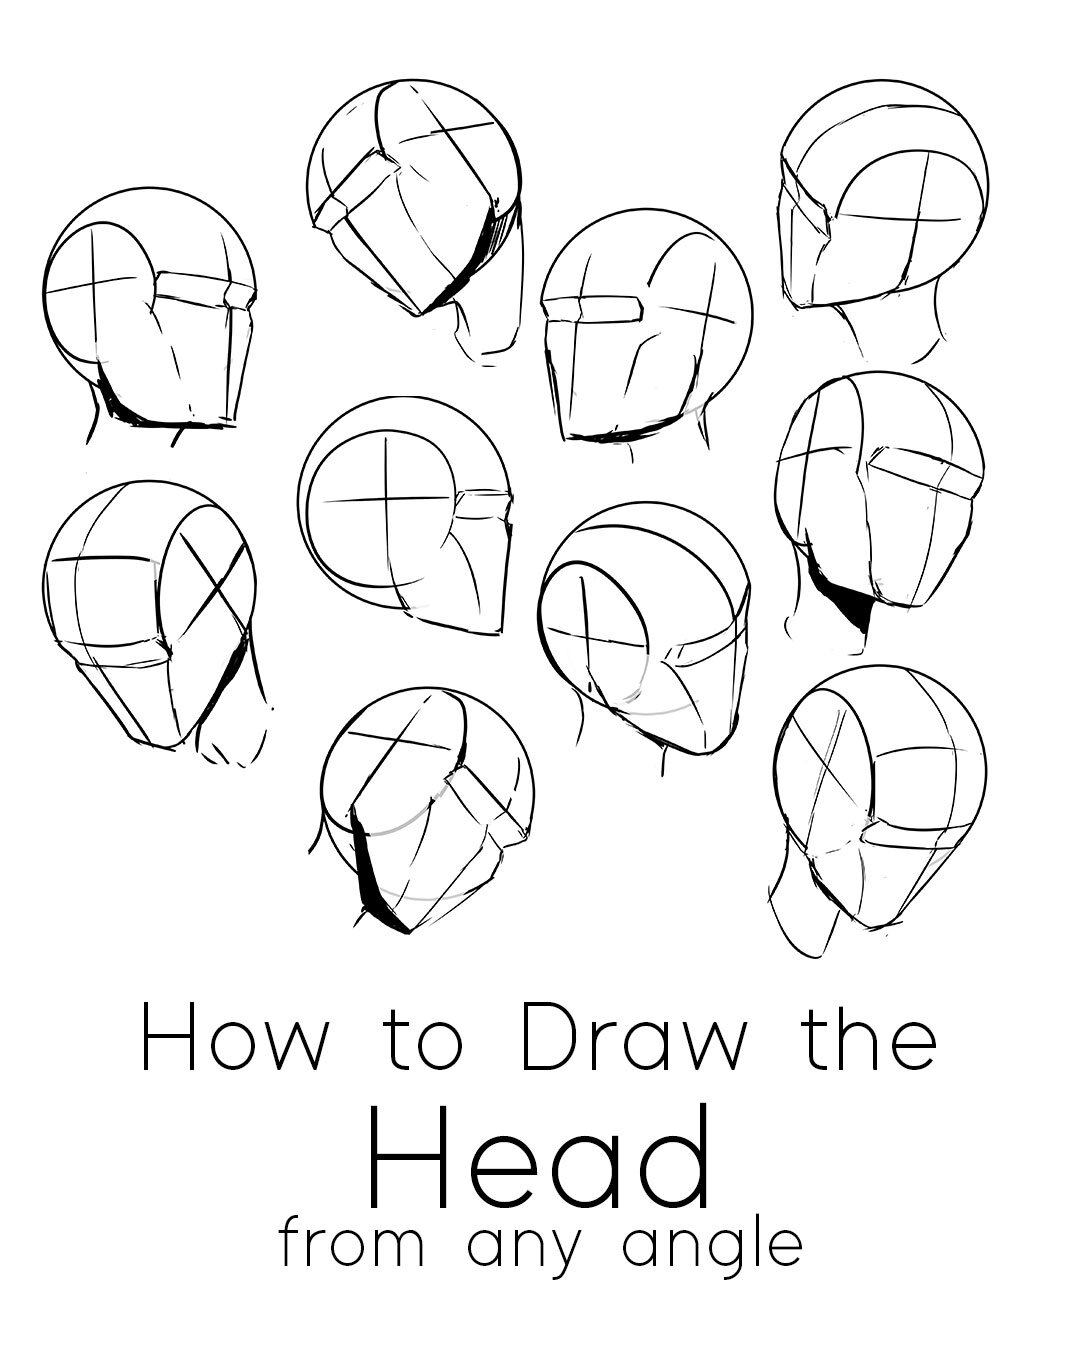 Learn how to Draw a Head step by step